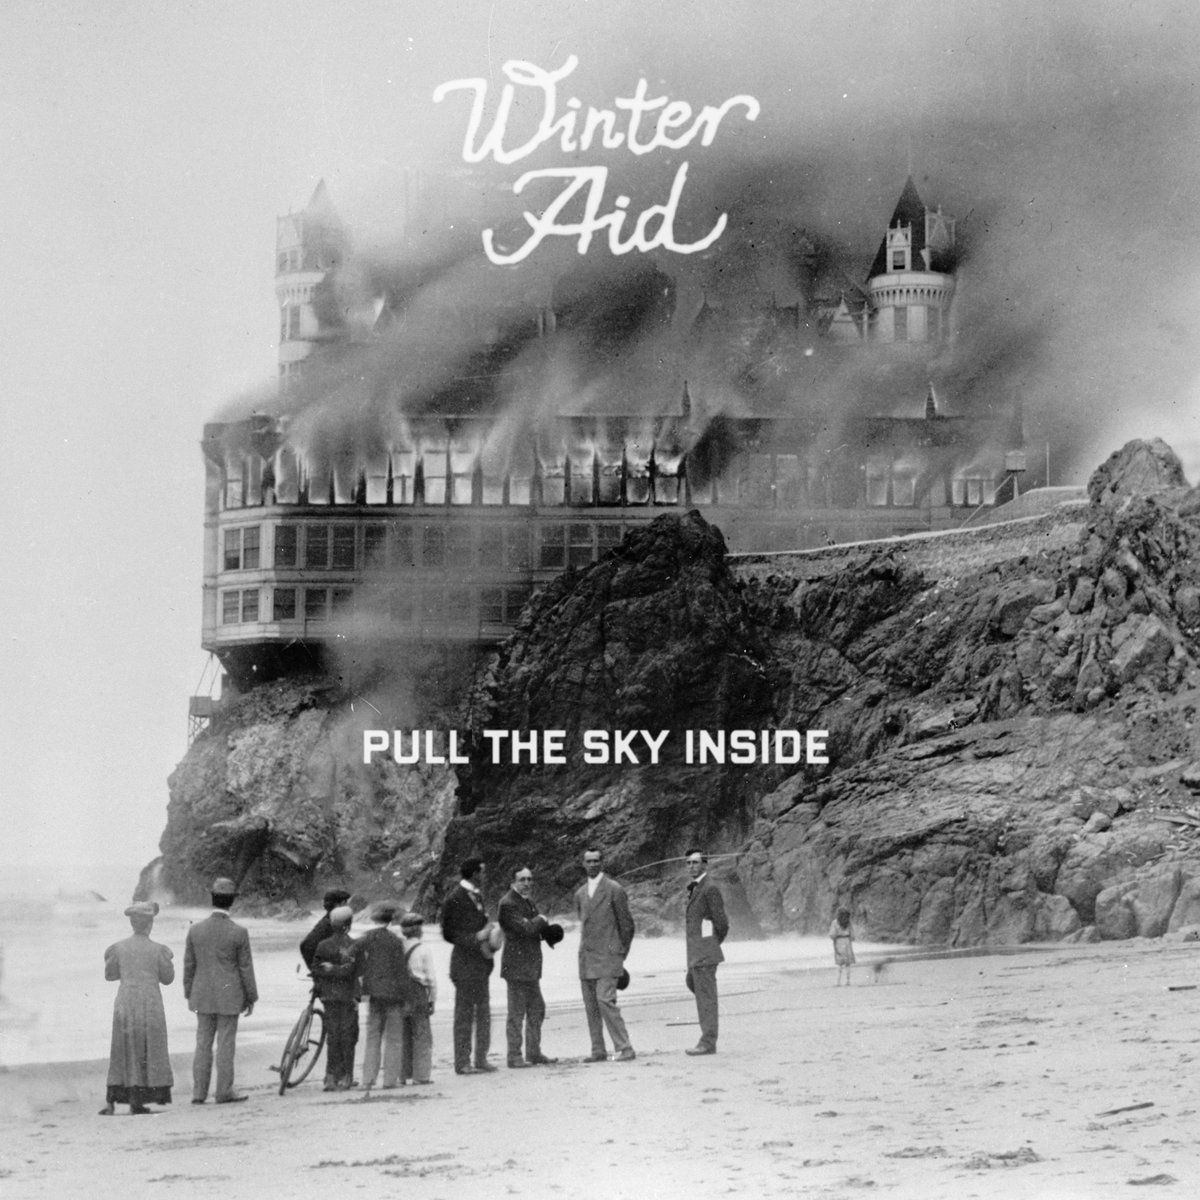 Pull The Sky Inside is the new Winter Aid album, and it is out now (see winteraid.com).

It is very strange (but very nice) to have this finally out in the world, after having worked on it in one way or another for years and years.

My favourite moments: